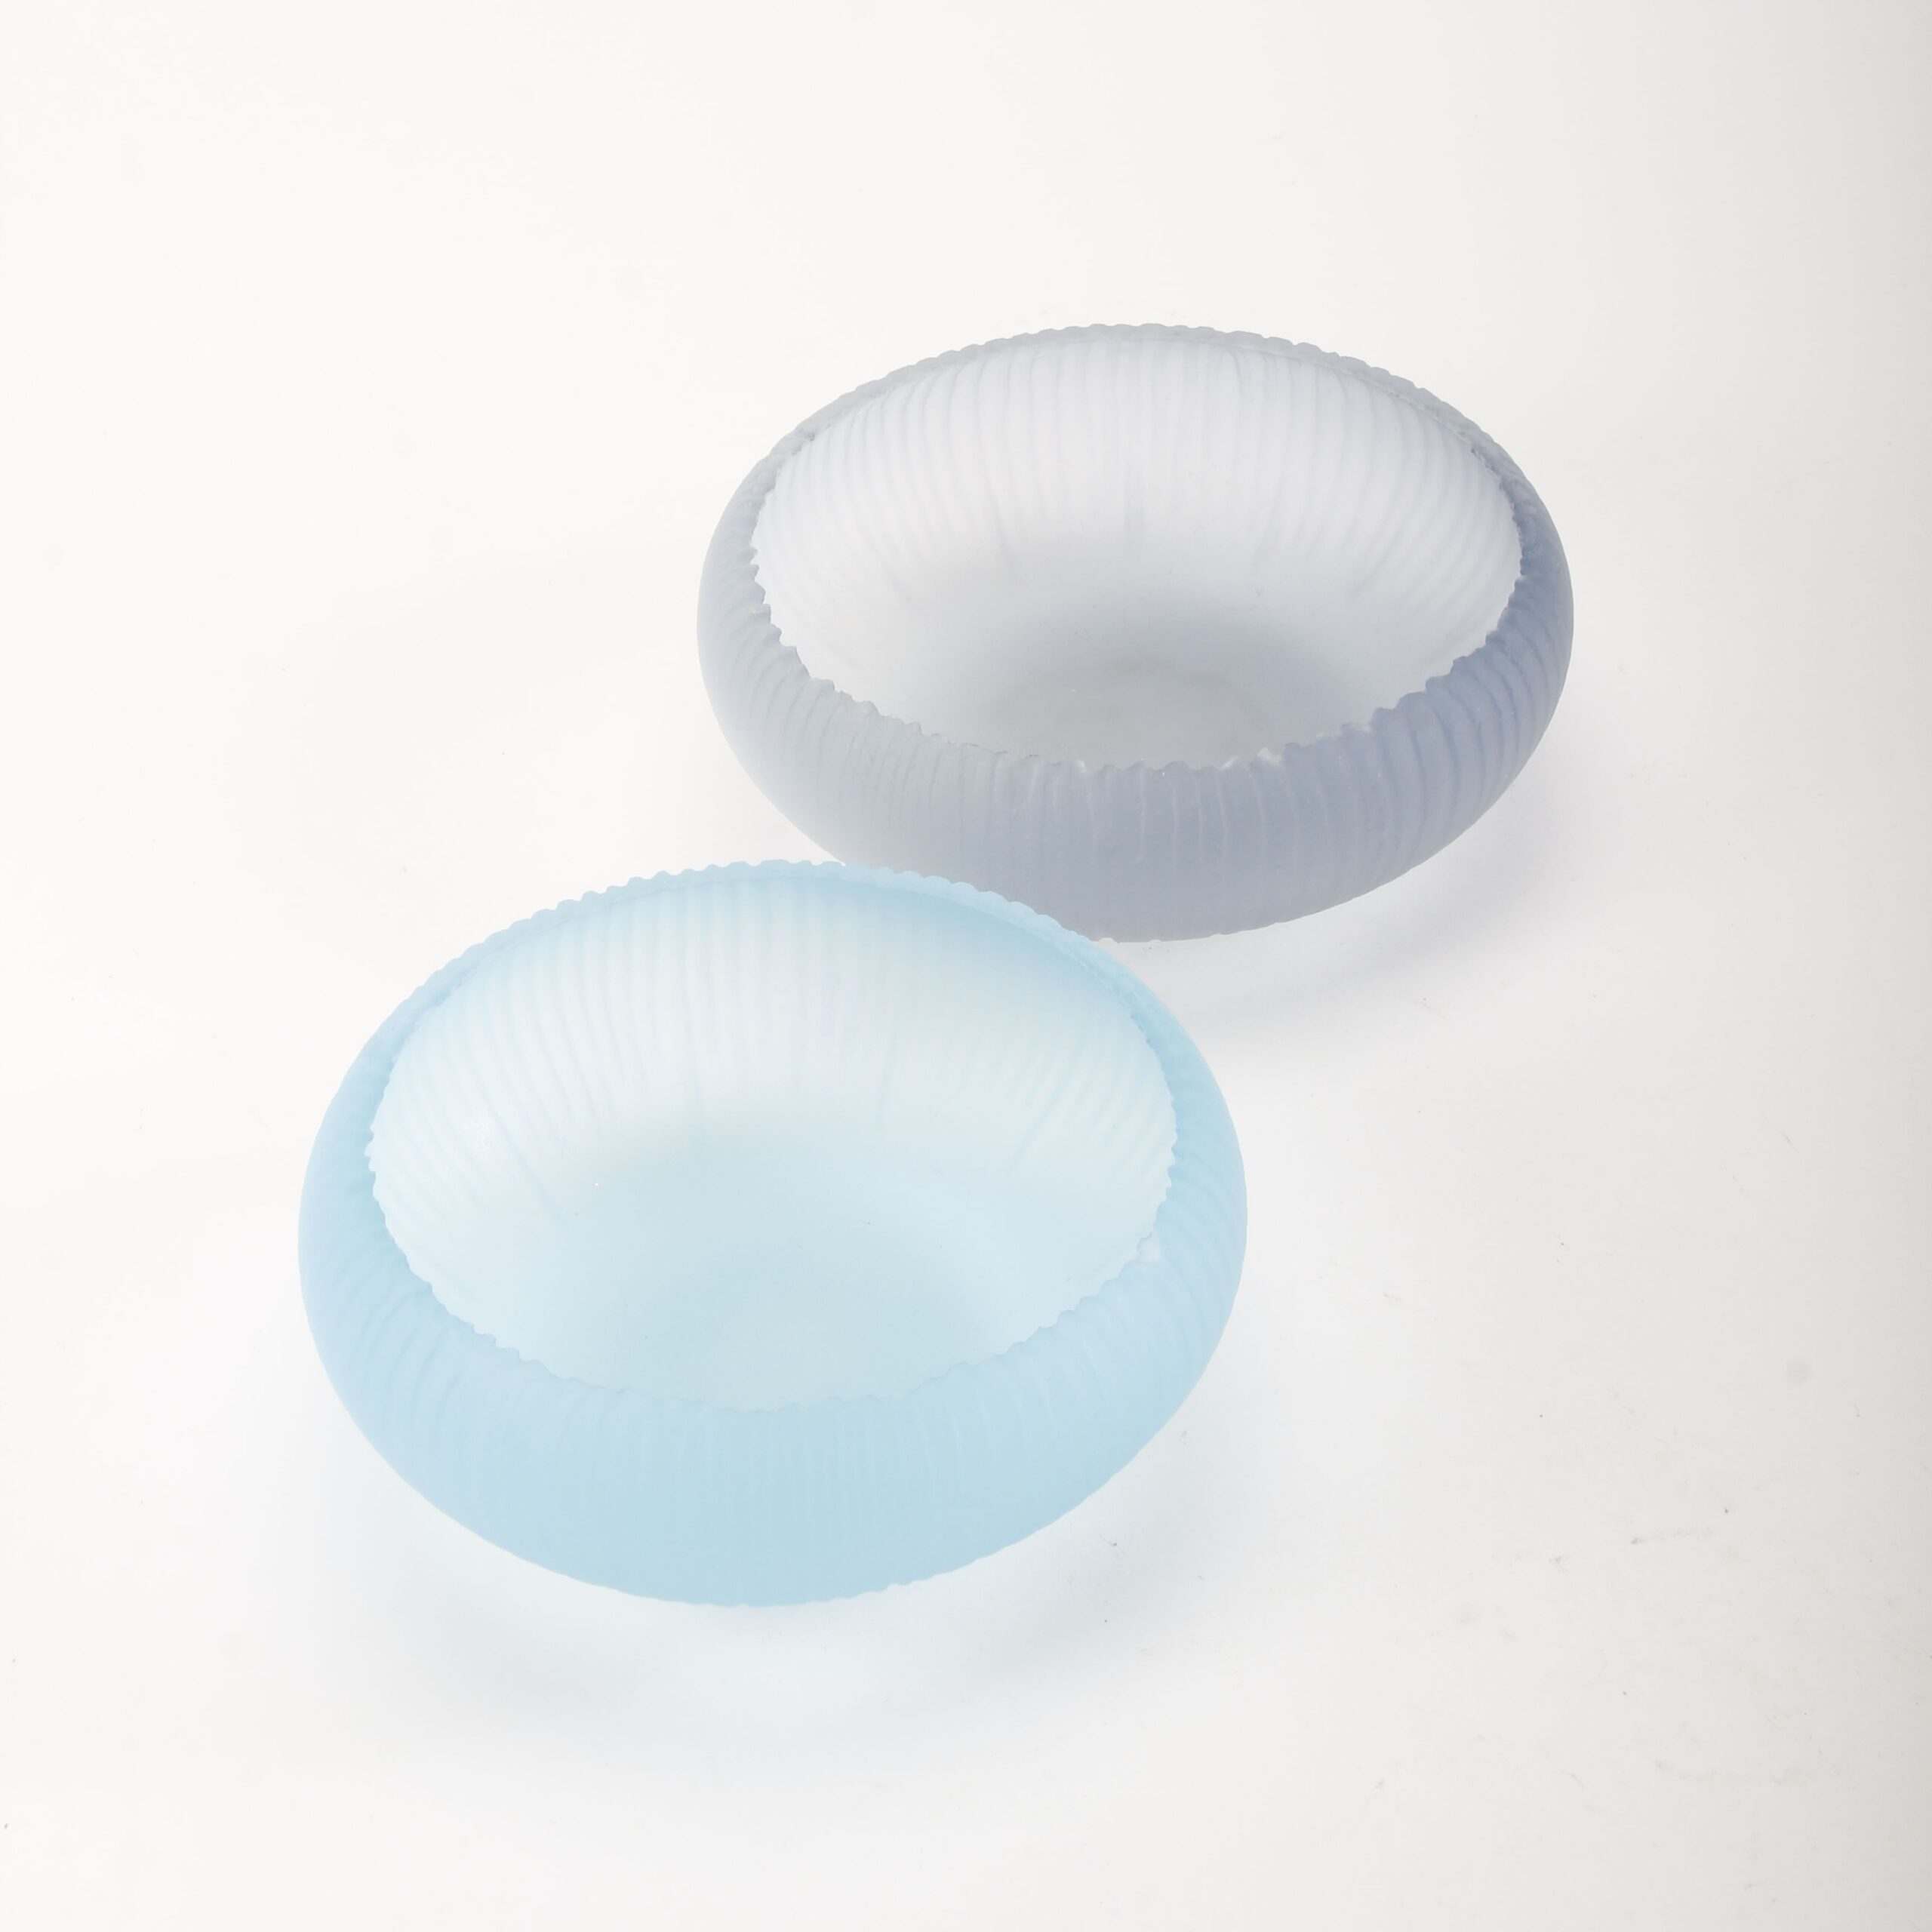 Courtney Downman: Aqua Bowl Carved Ring Dish Product Image 1 of 3